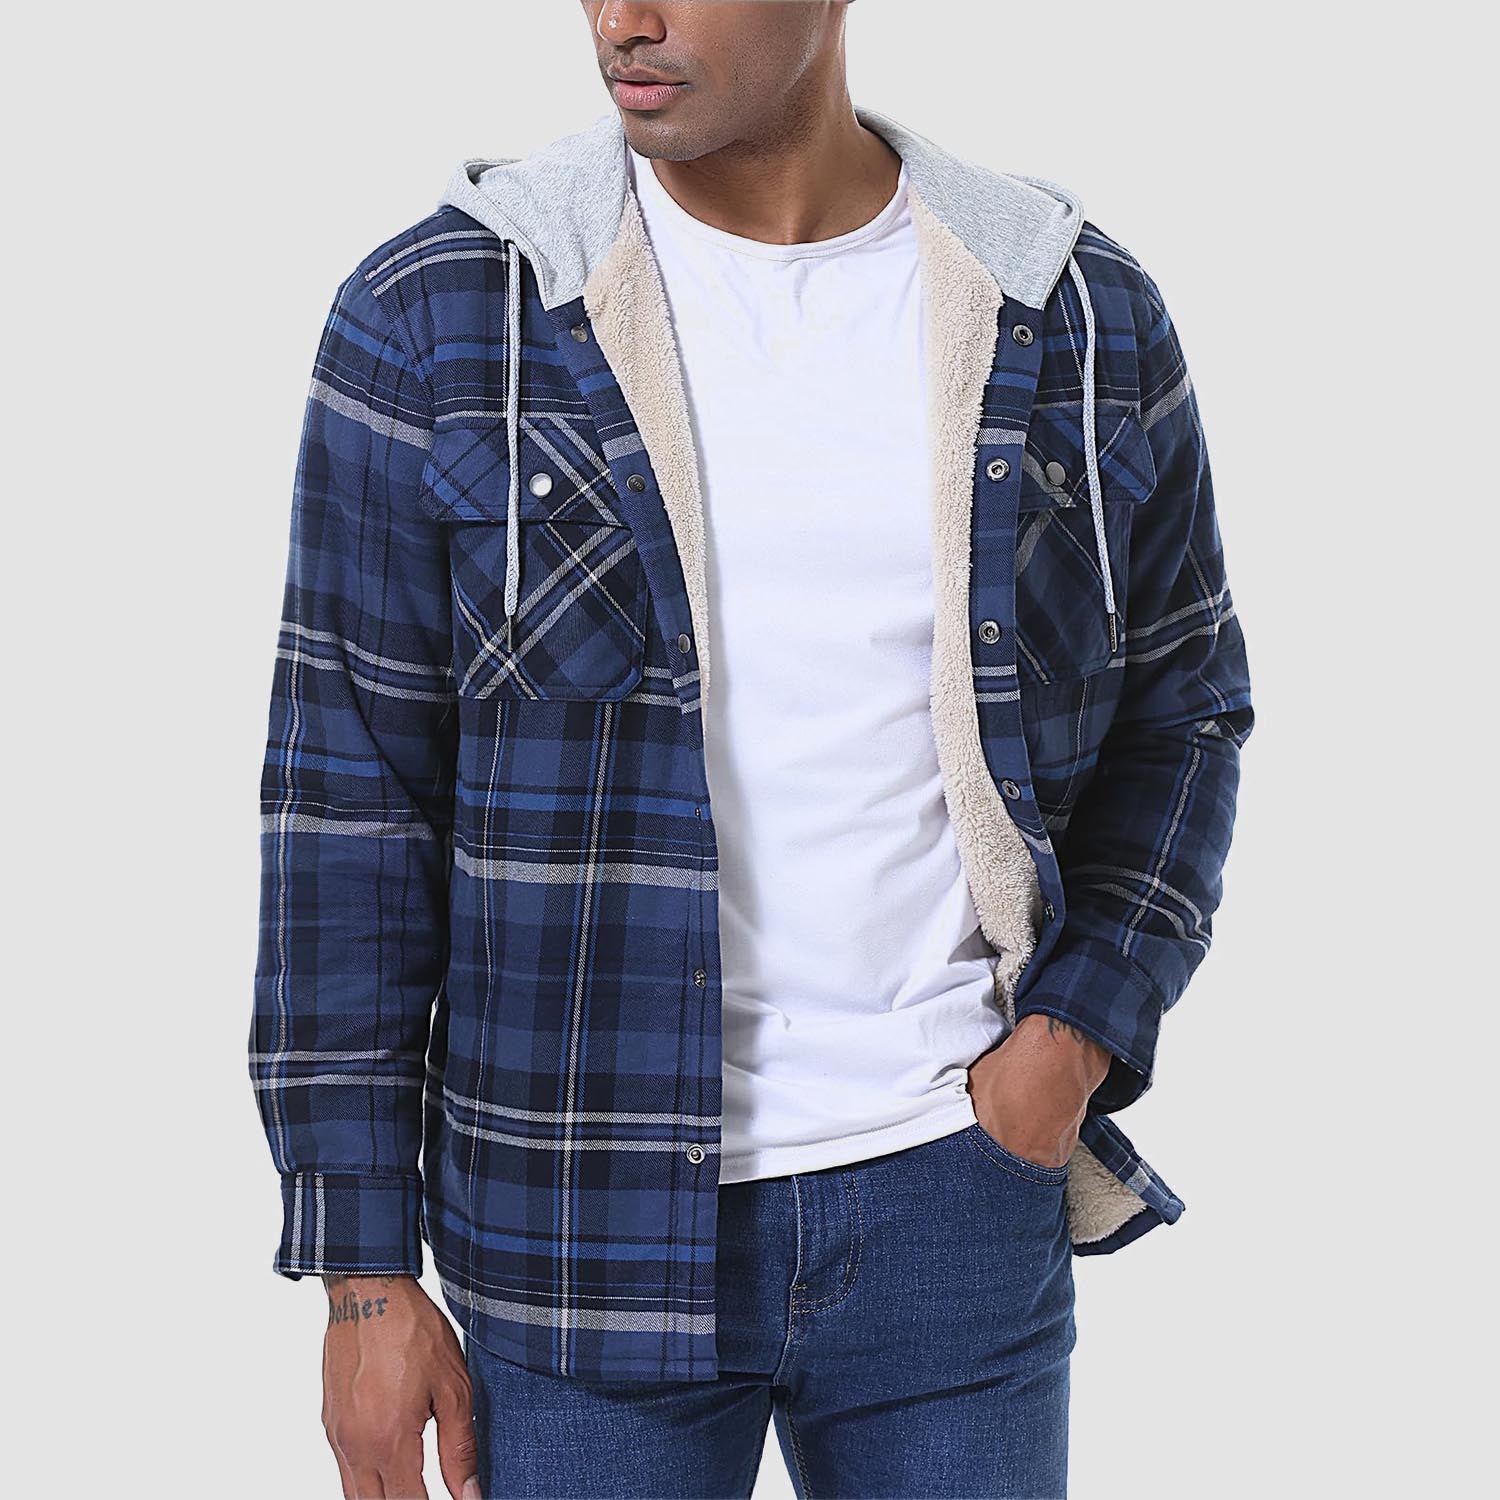 Winter Flannel Hoodies with Sherpa Lining for Men Flannel Plaid Jackets